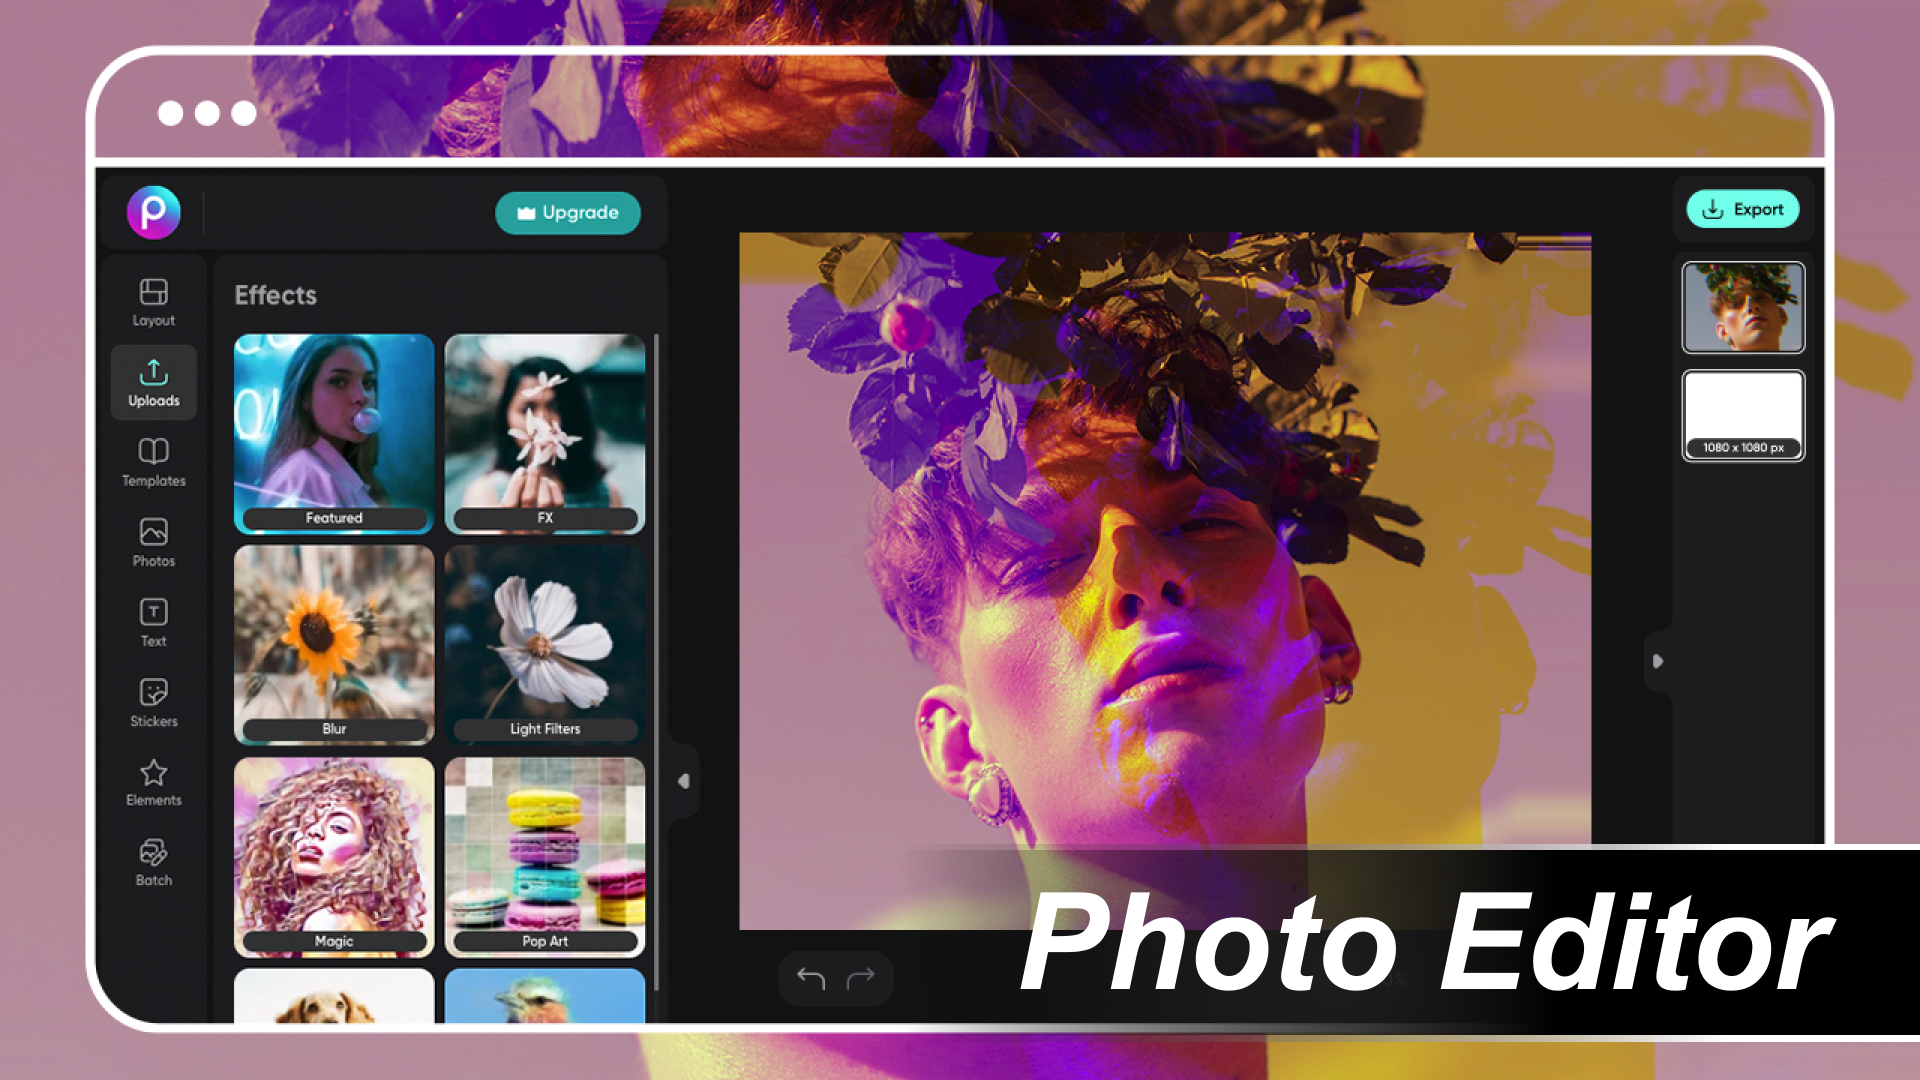 Top 10 Best Photo Editing Apps for Android